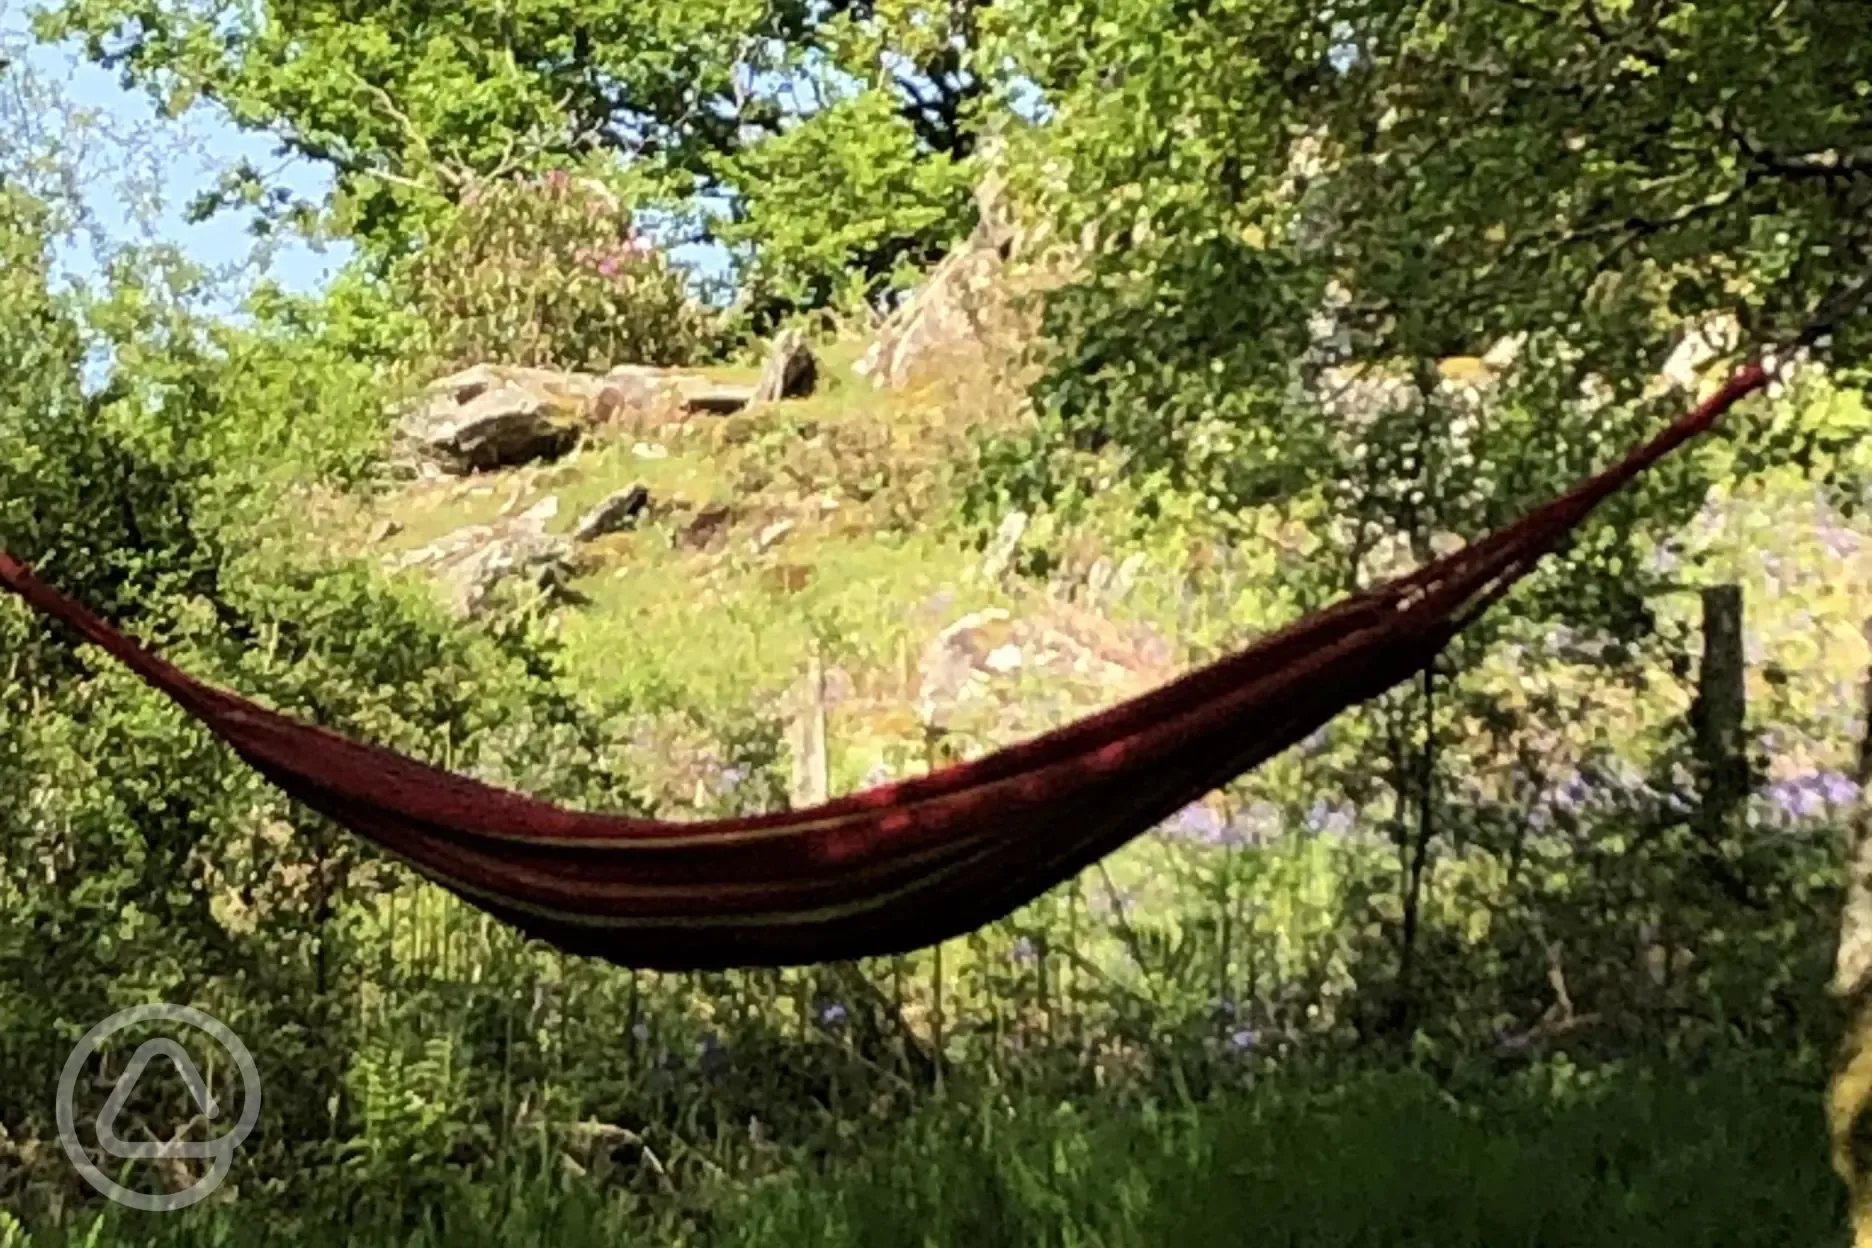 Relax in available hammocks